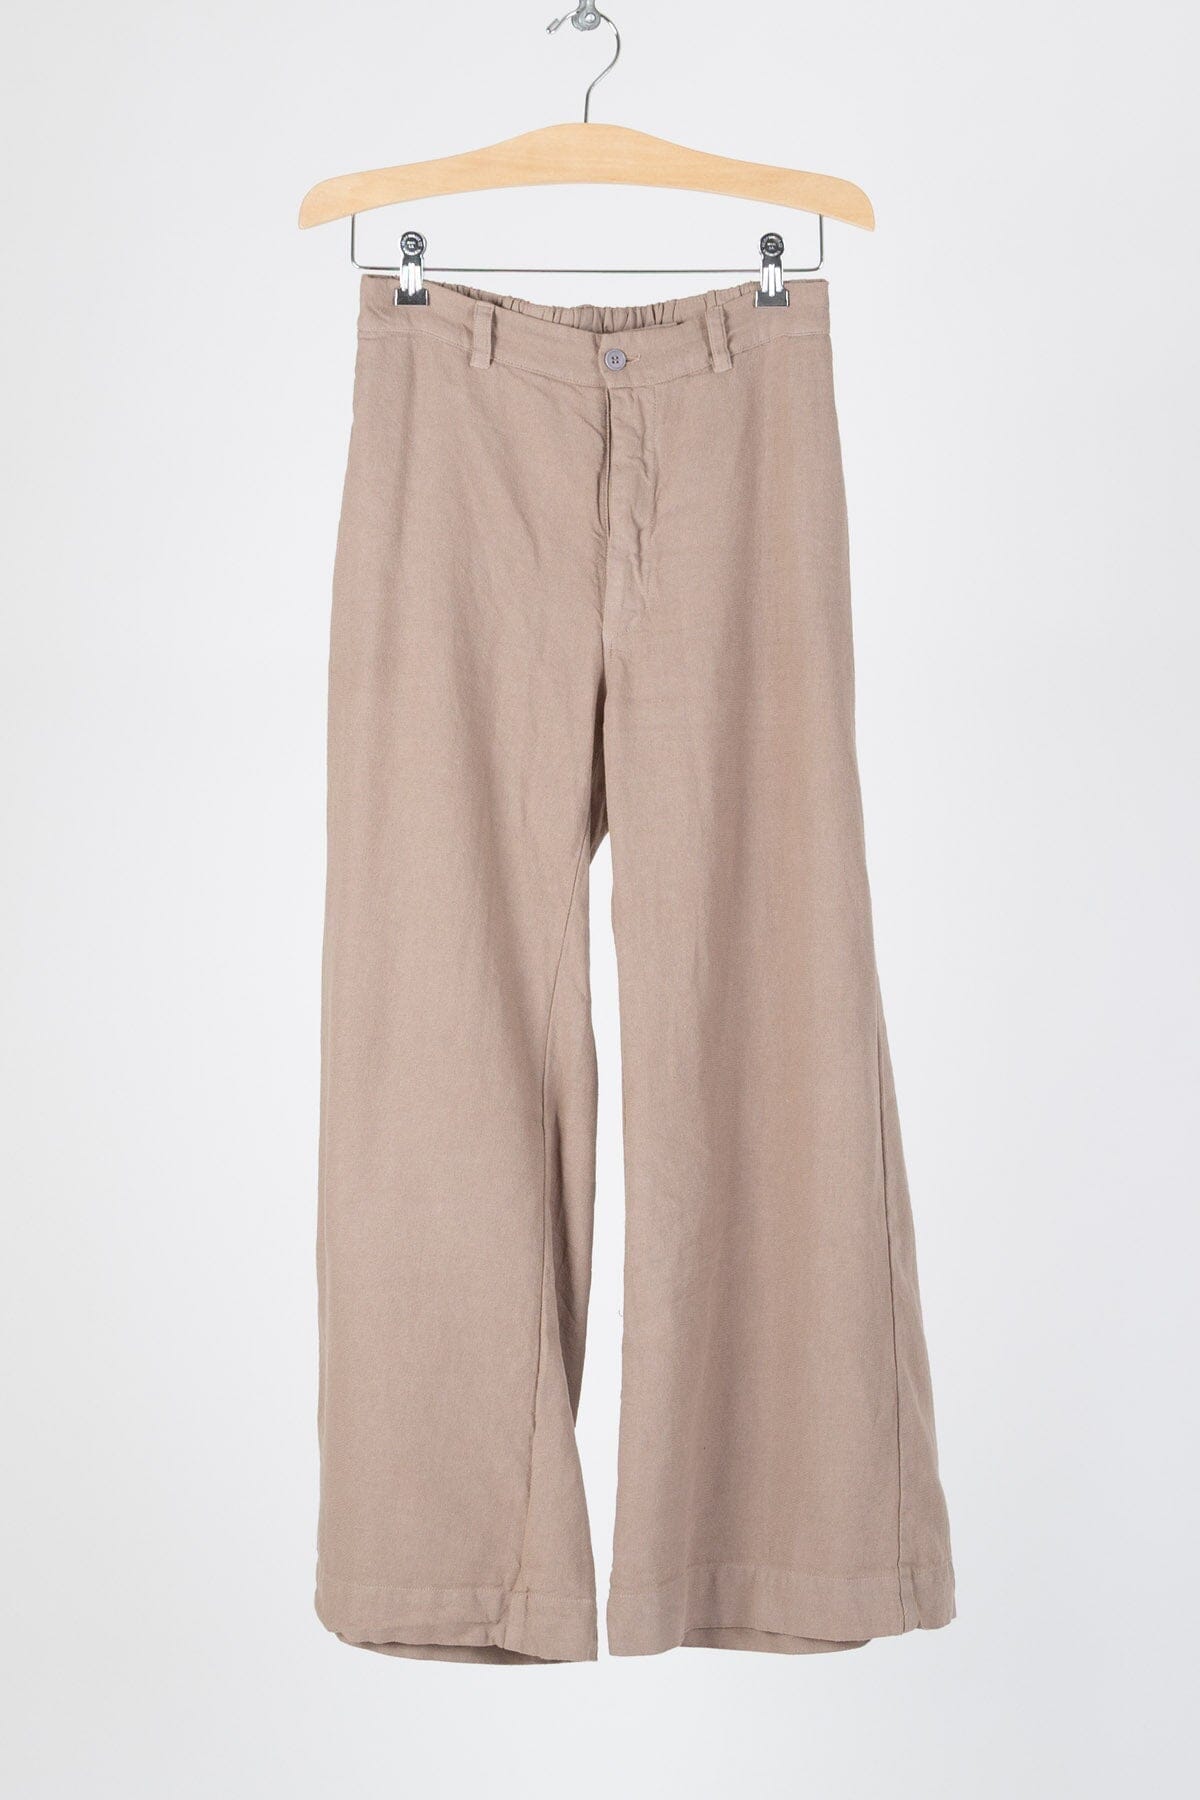 Polly - Cotton Twill S22 - 4271 Bottoms CP Shades 